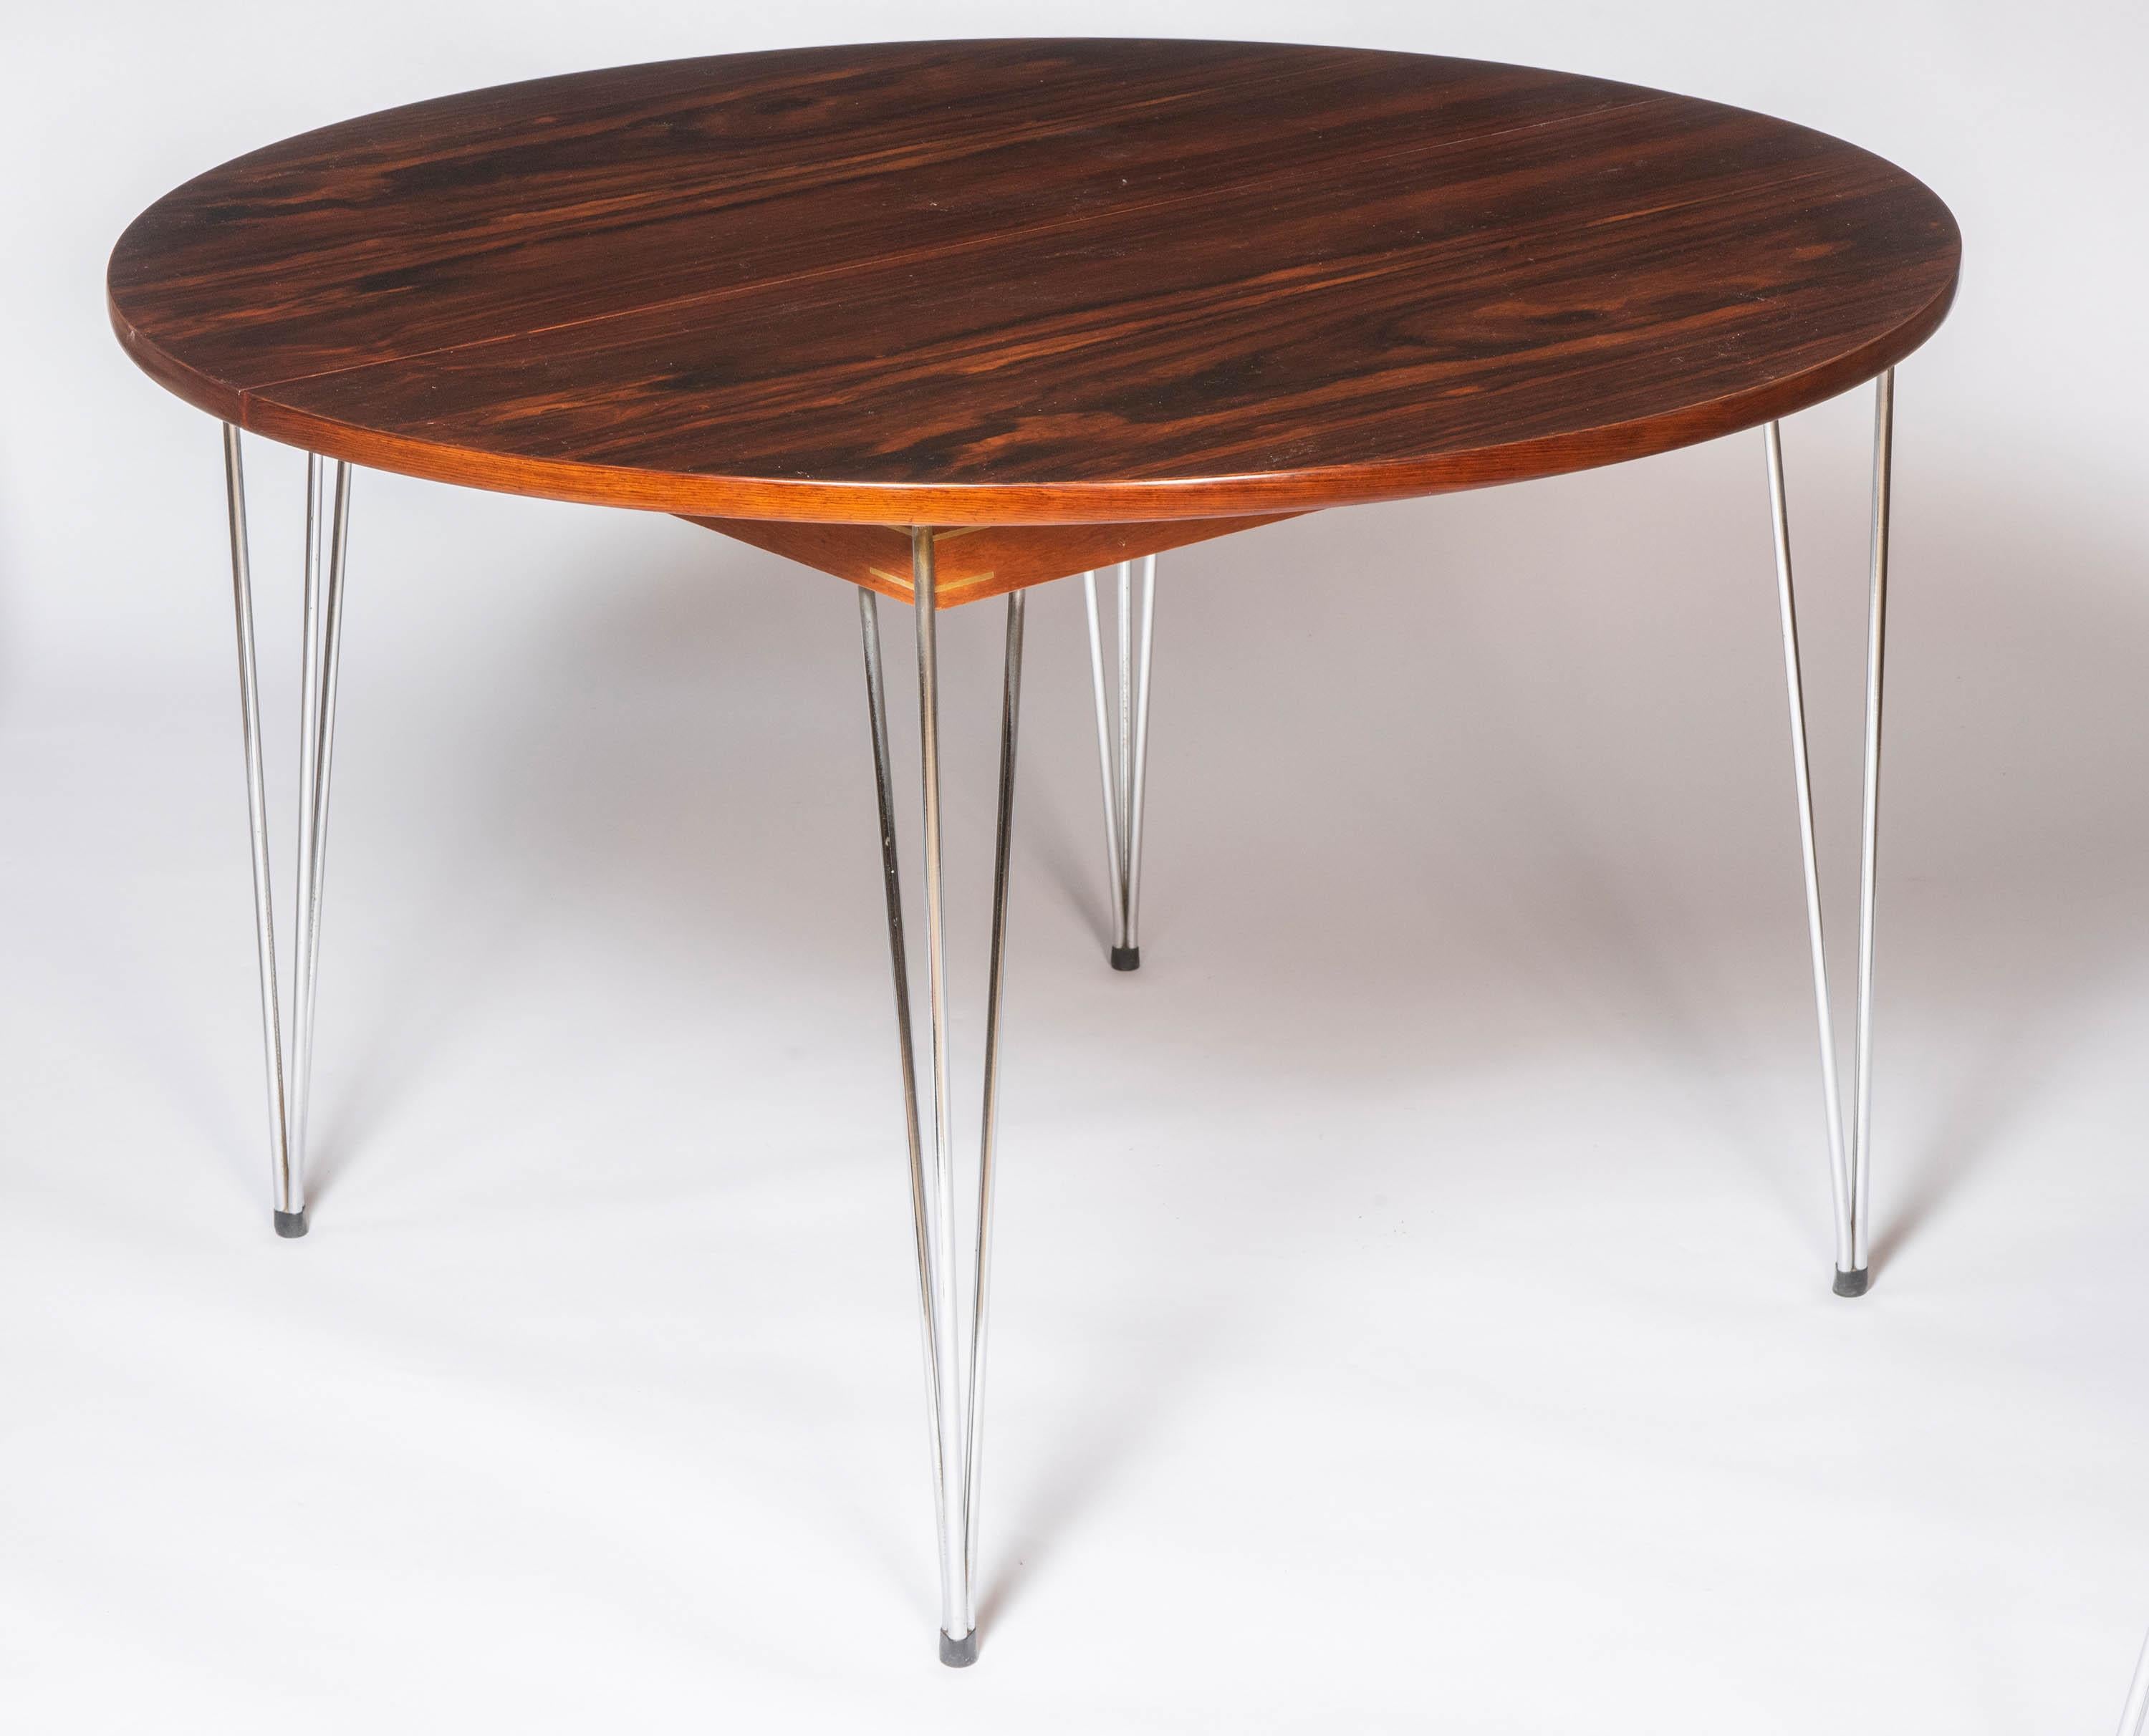 Mid-20th Century Rosewood Dining Table and 6 Dining Chairs by Hans Brattrud, Norway, circa 1957